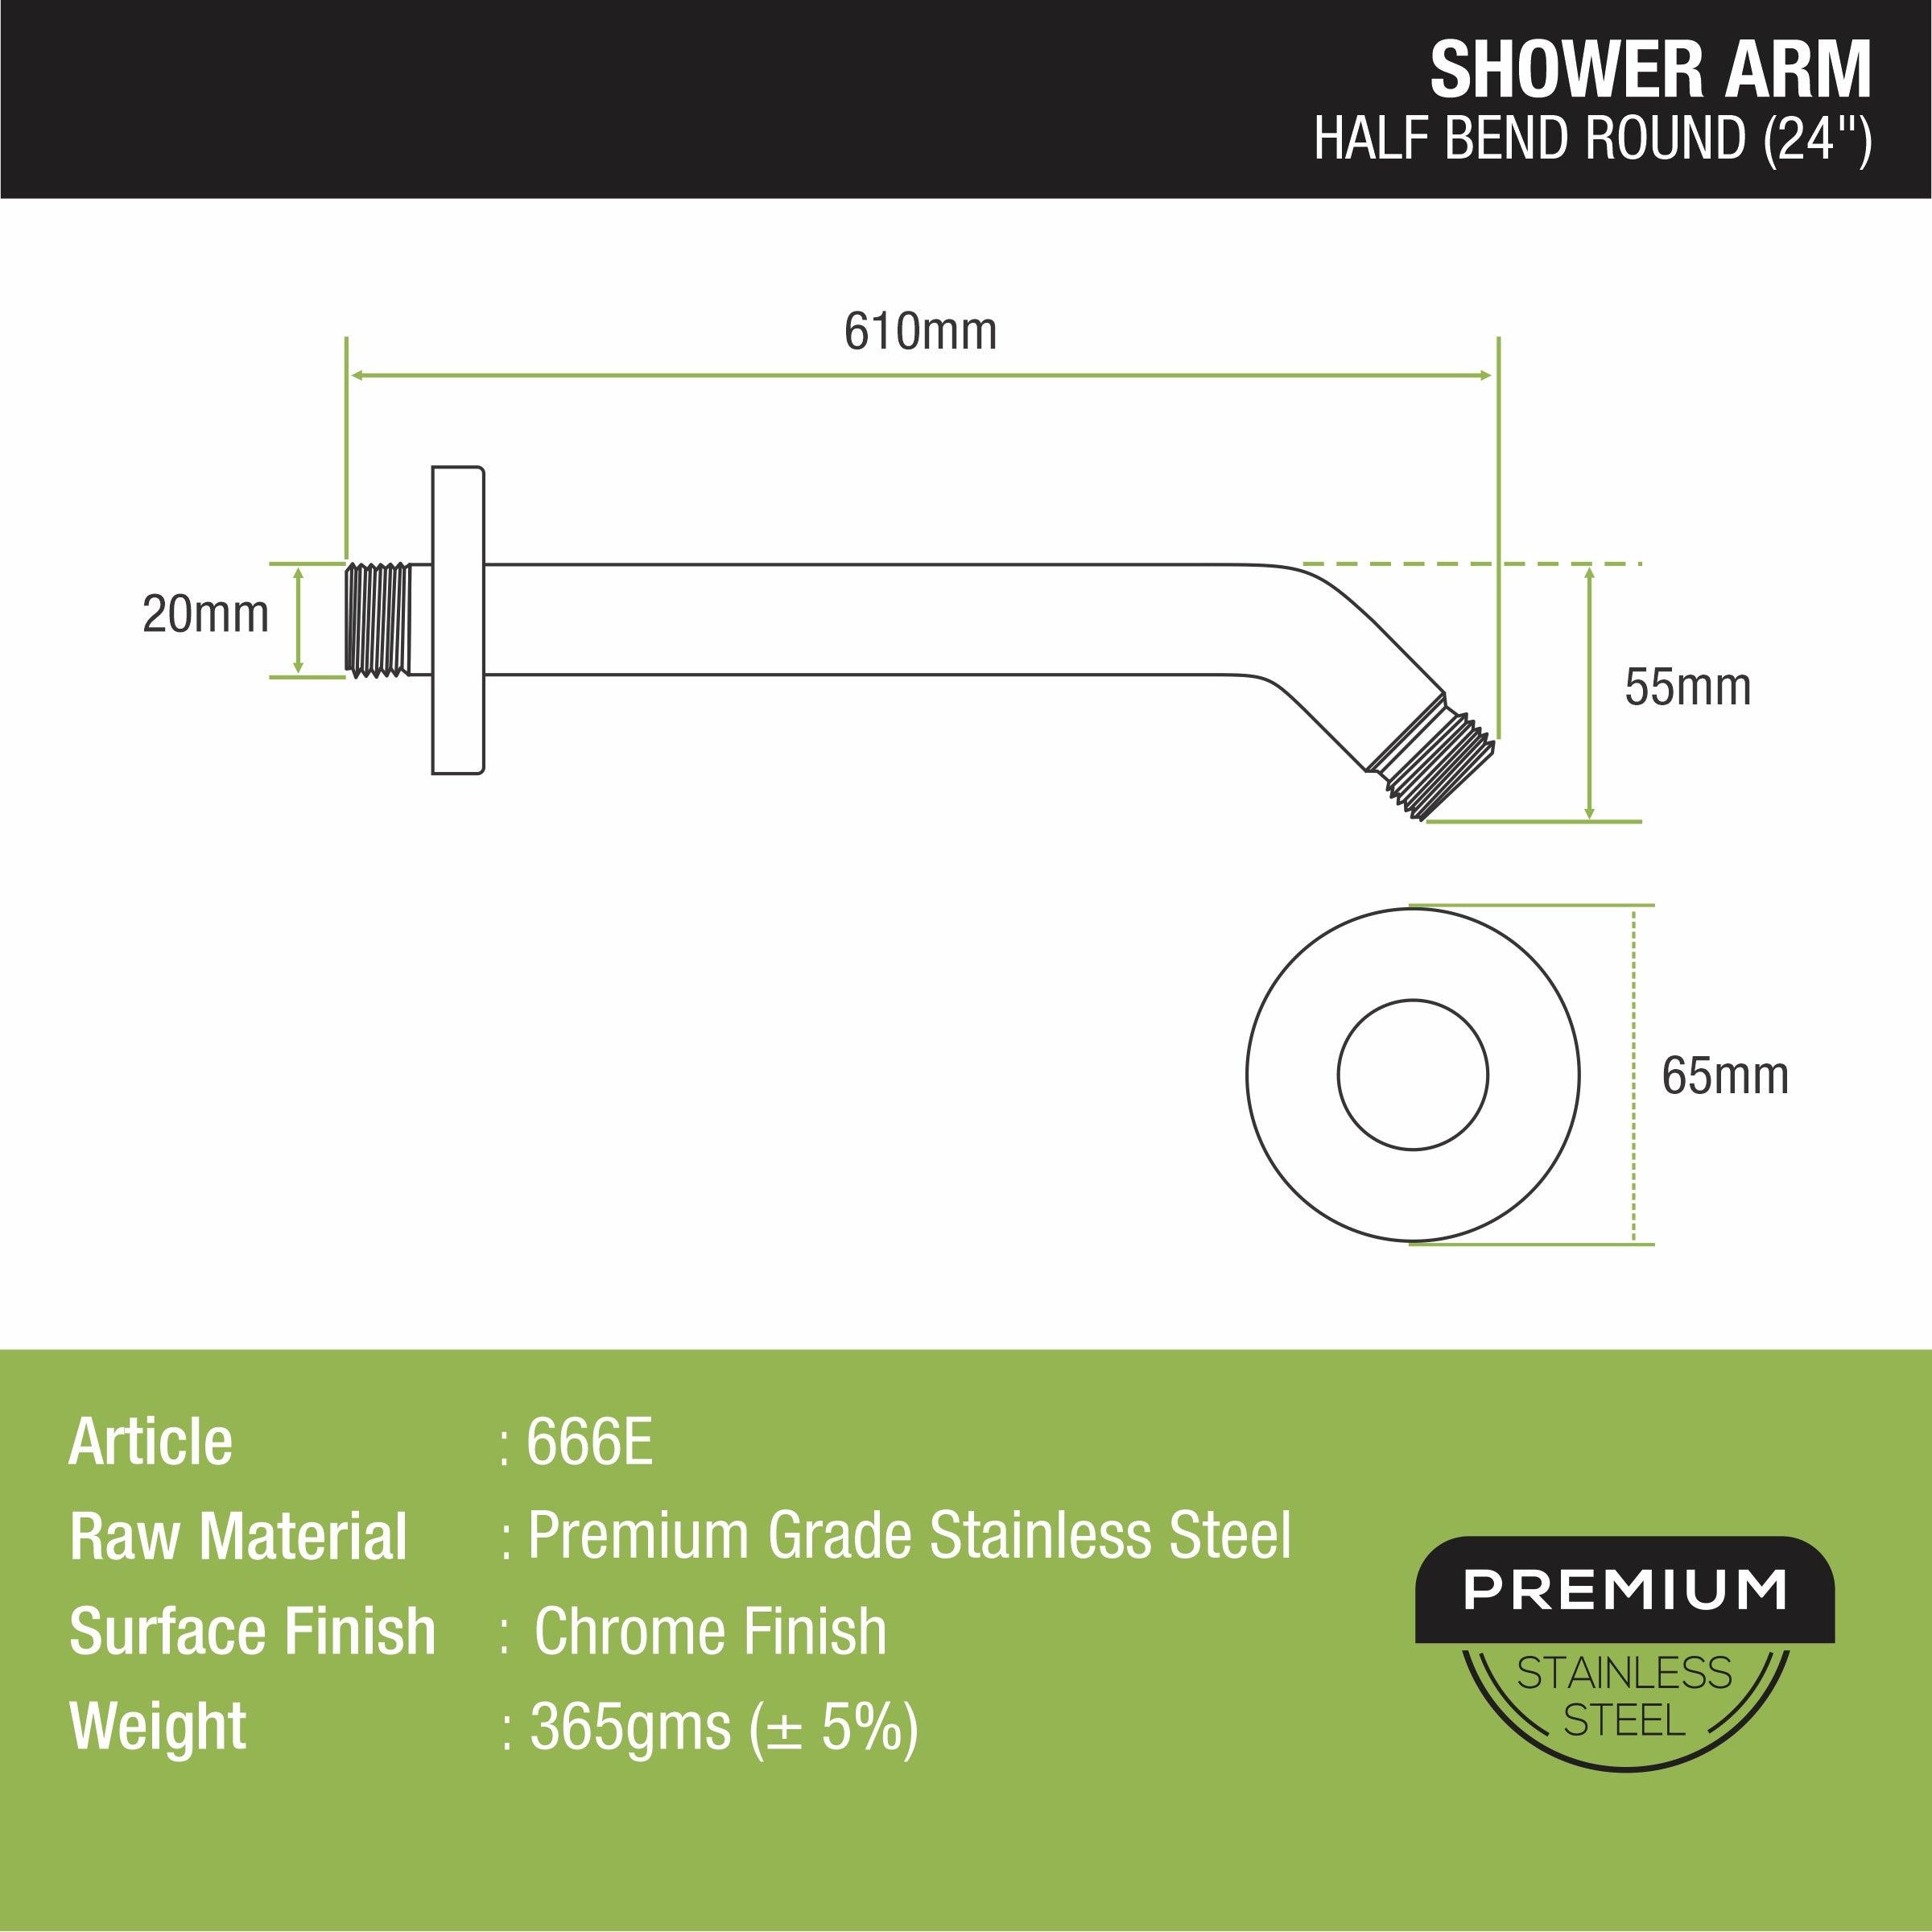 Half Bend Round Shower Arm (24 Inches) sizes and dimensions